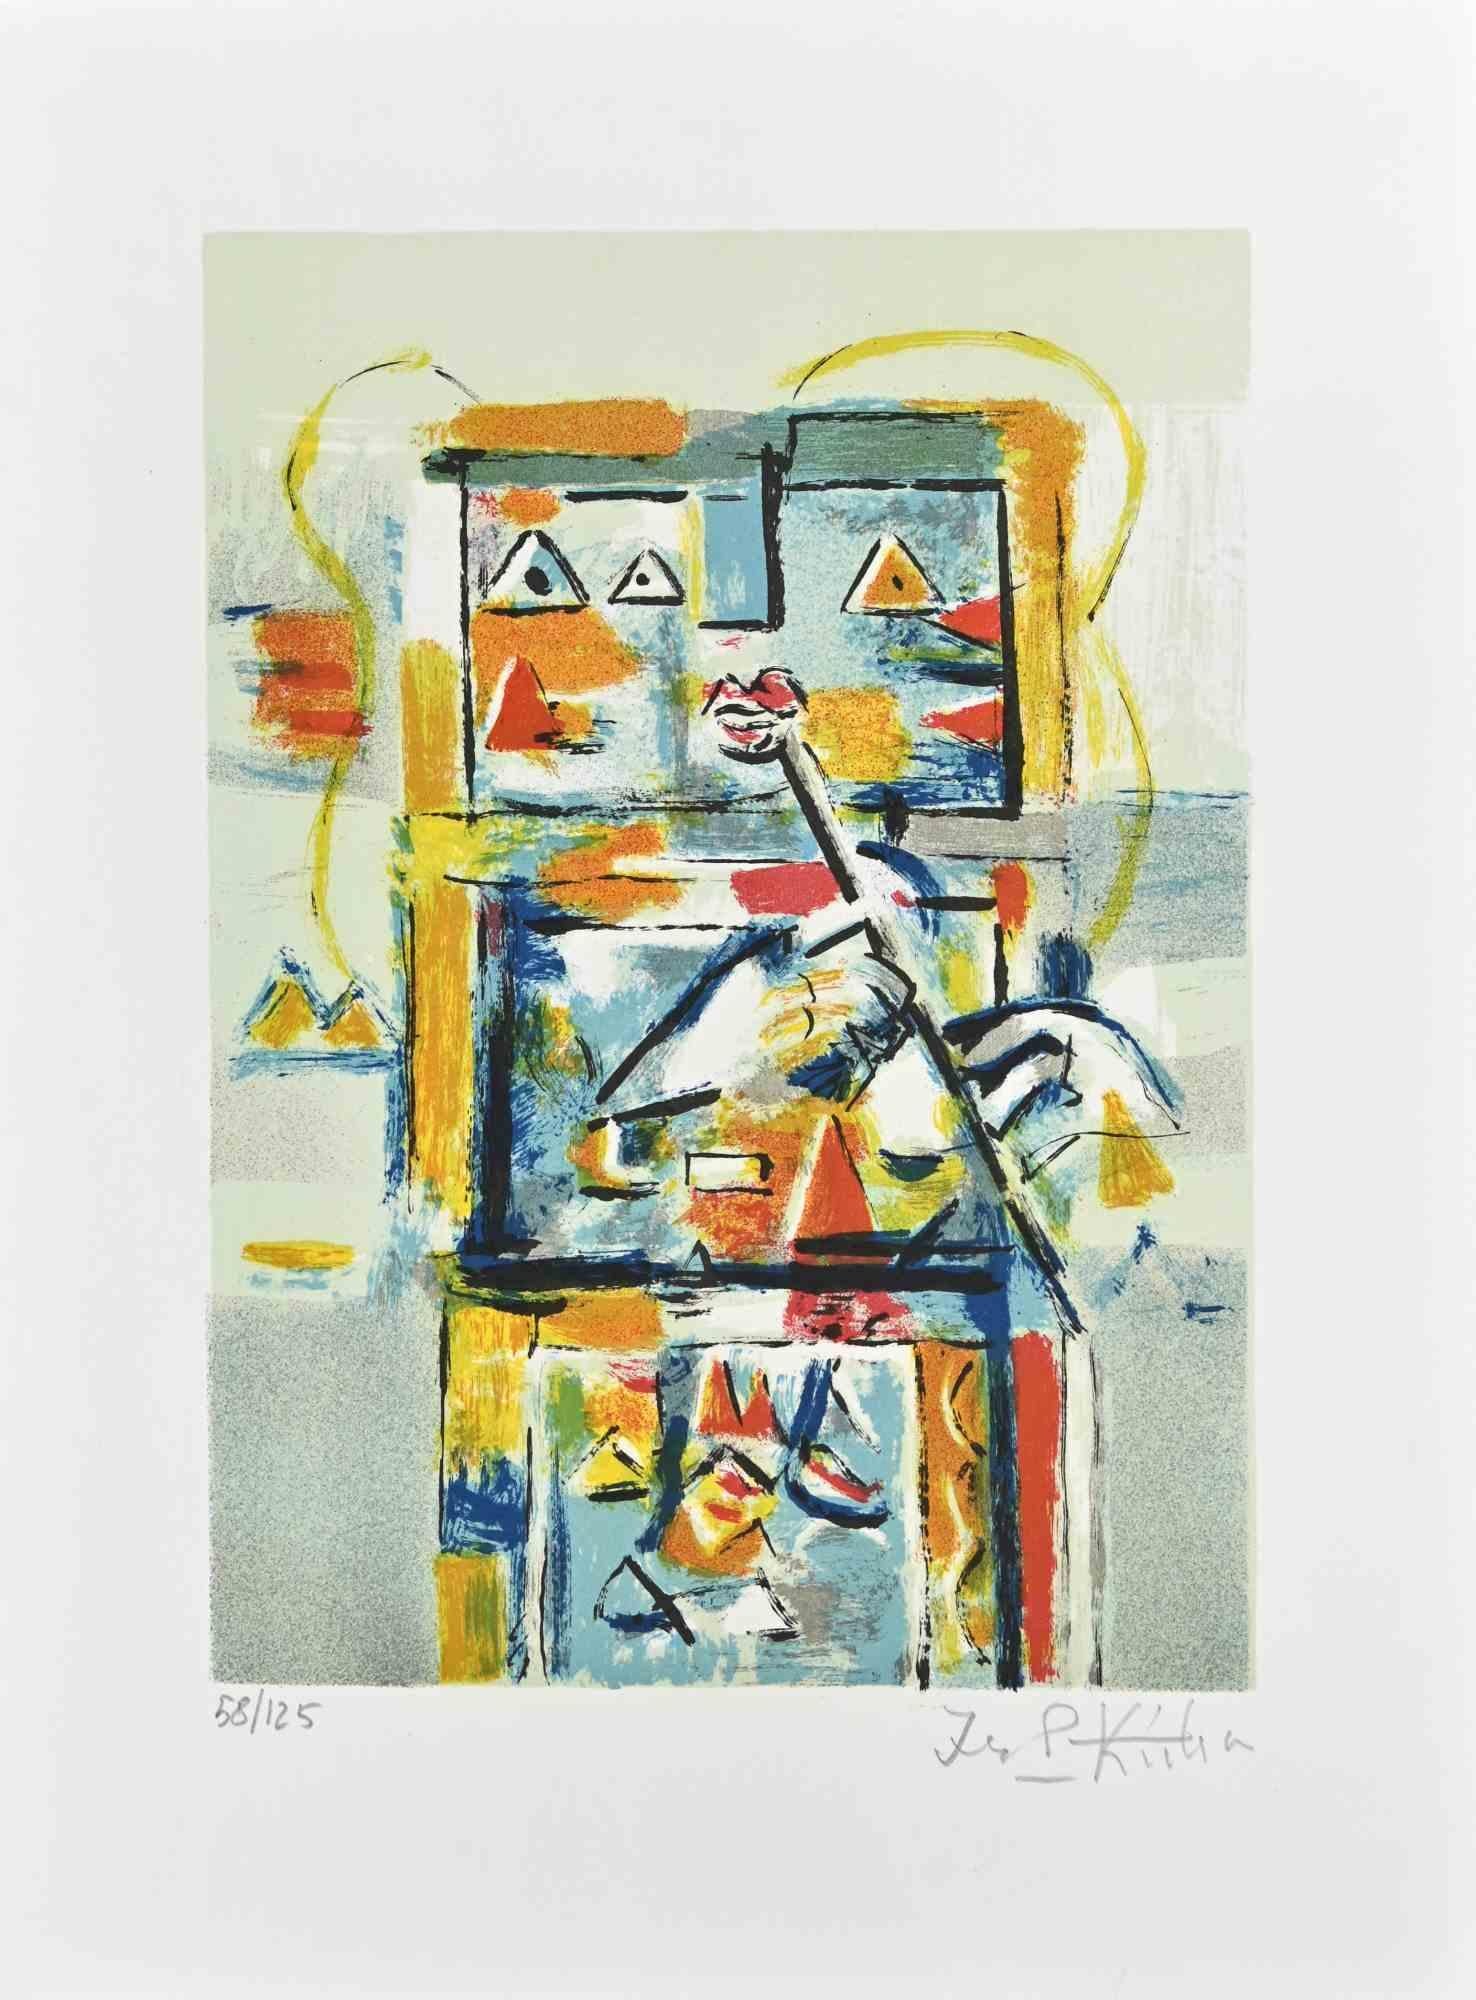 Robot is a Lithograph realized in the 1980s by Ibrahim Kodra.

Good conditions. Hand-signed.

Numbered. Edition,58/125.

The artwork is depicted through soft strokes in a well-balanced composition.